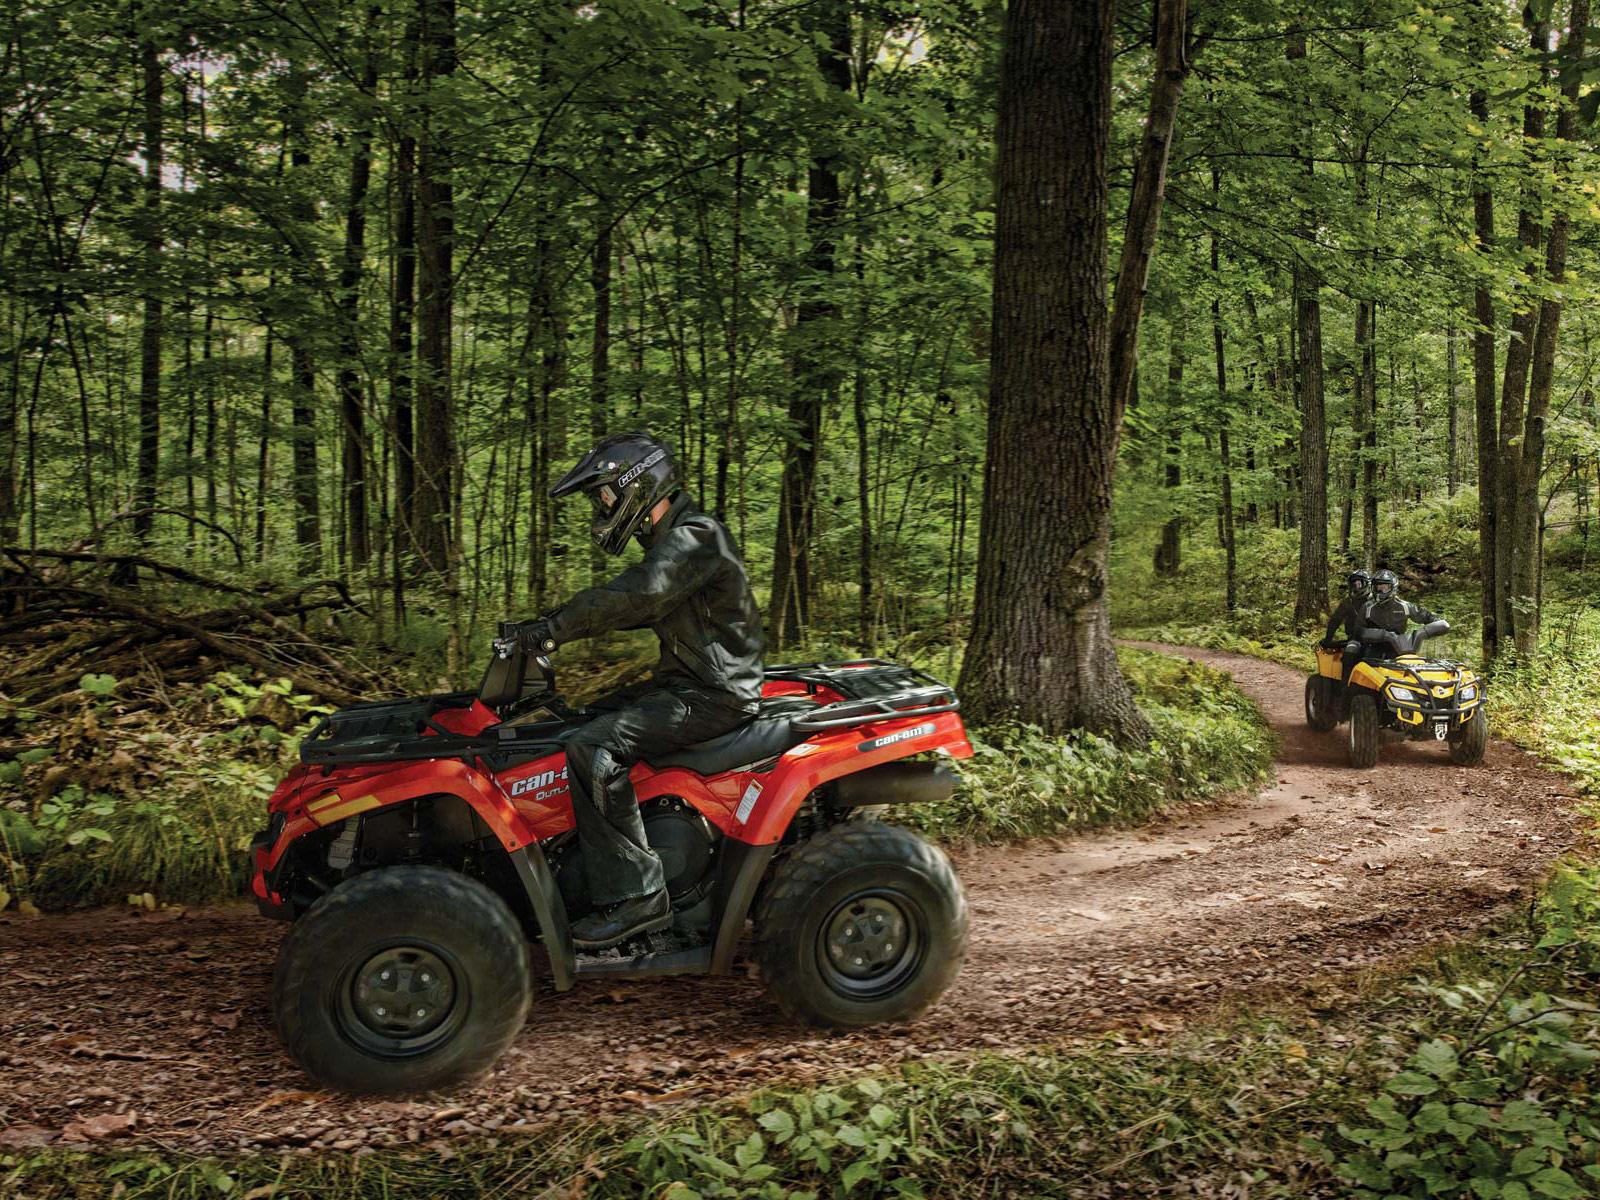 ATV picture, wallpaper, specs, insurance, accident lawyers: ATV